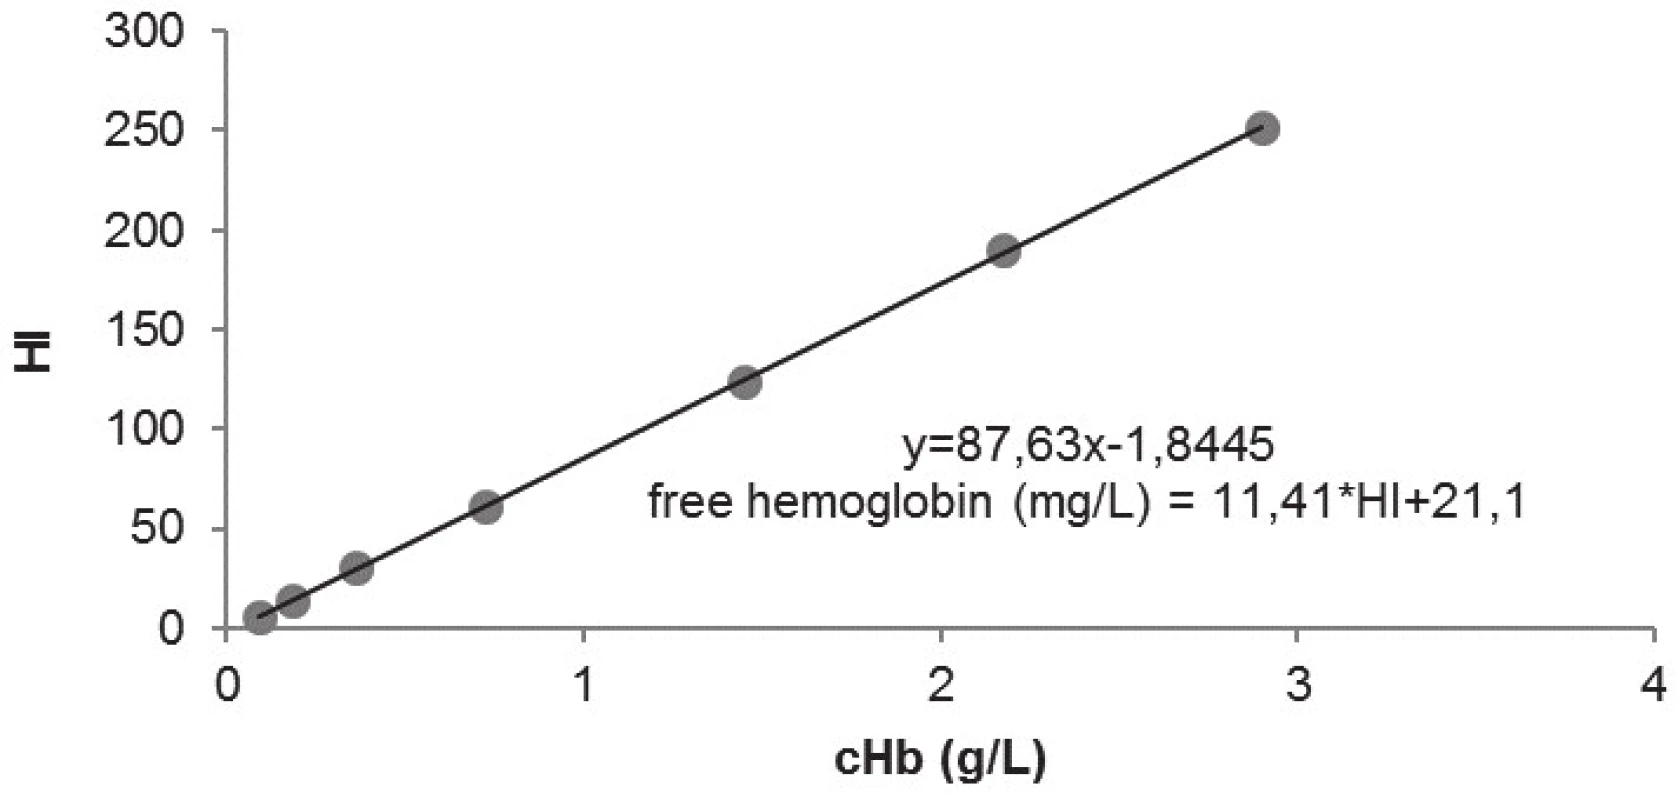 An equation for calculation of plasma free hemoglobin
concentration, which was calculated using linear regression
(meantioned above) of HI and concentration of plasm